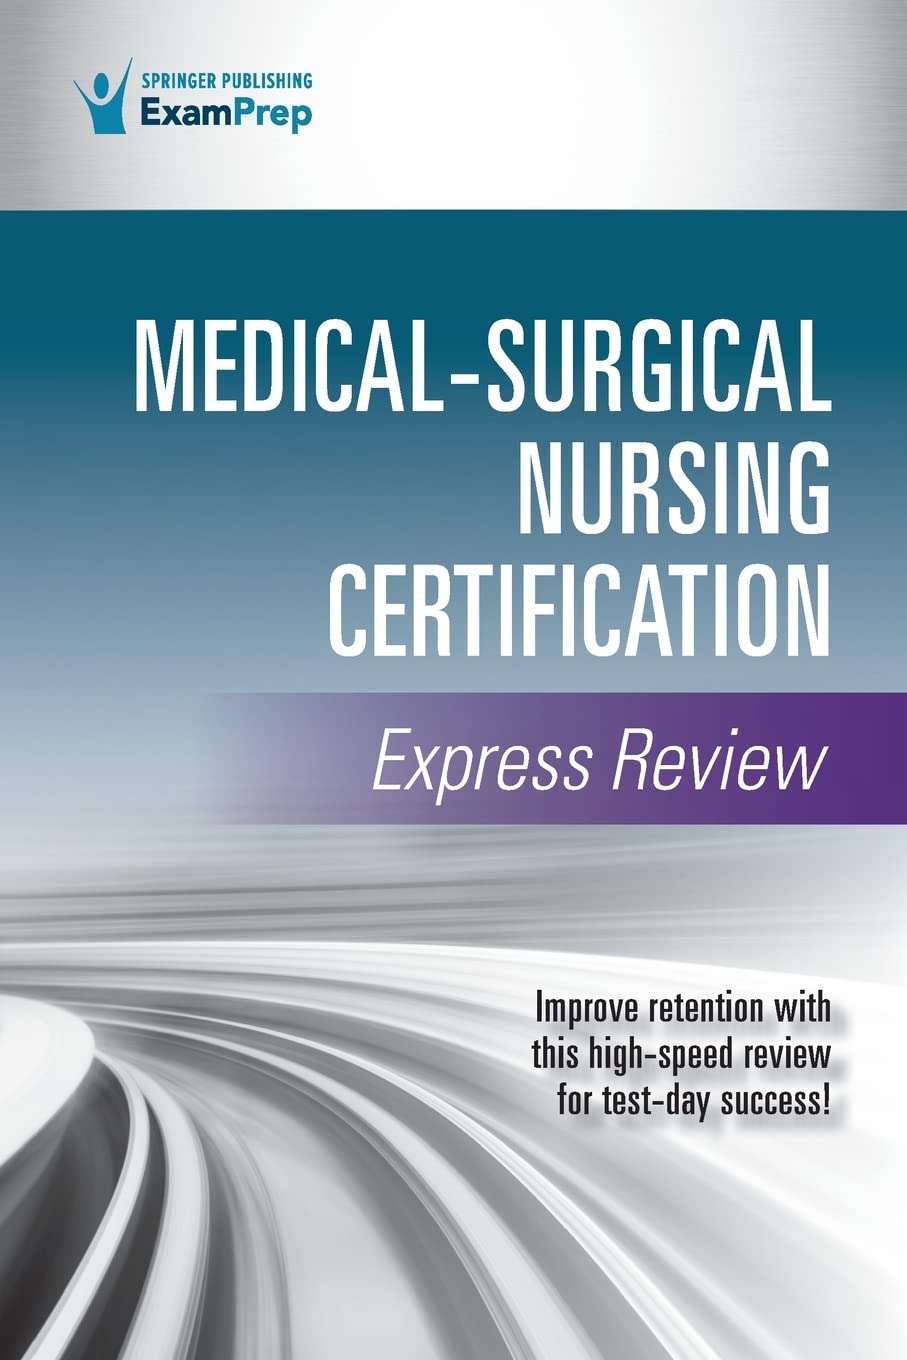 Medical-Surgical Nursing Certification Express Review  by Springer Publishing Company